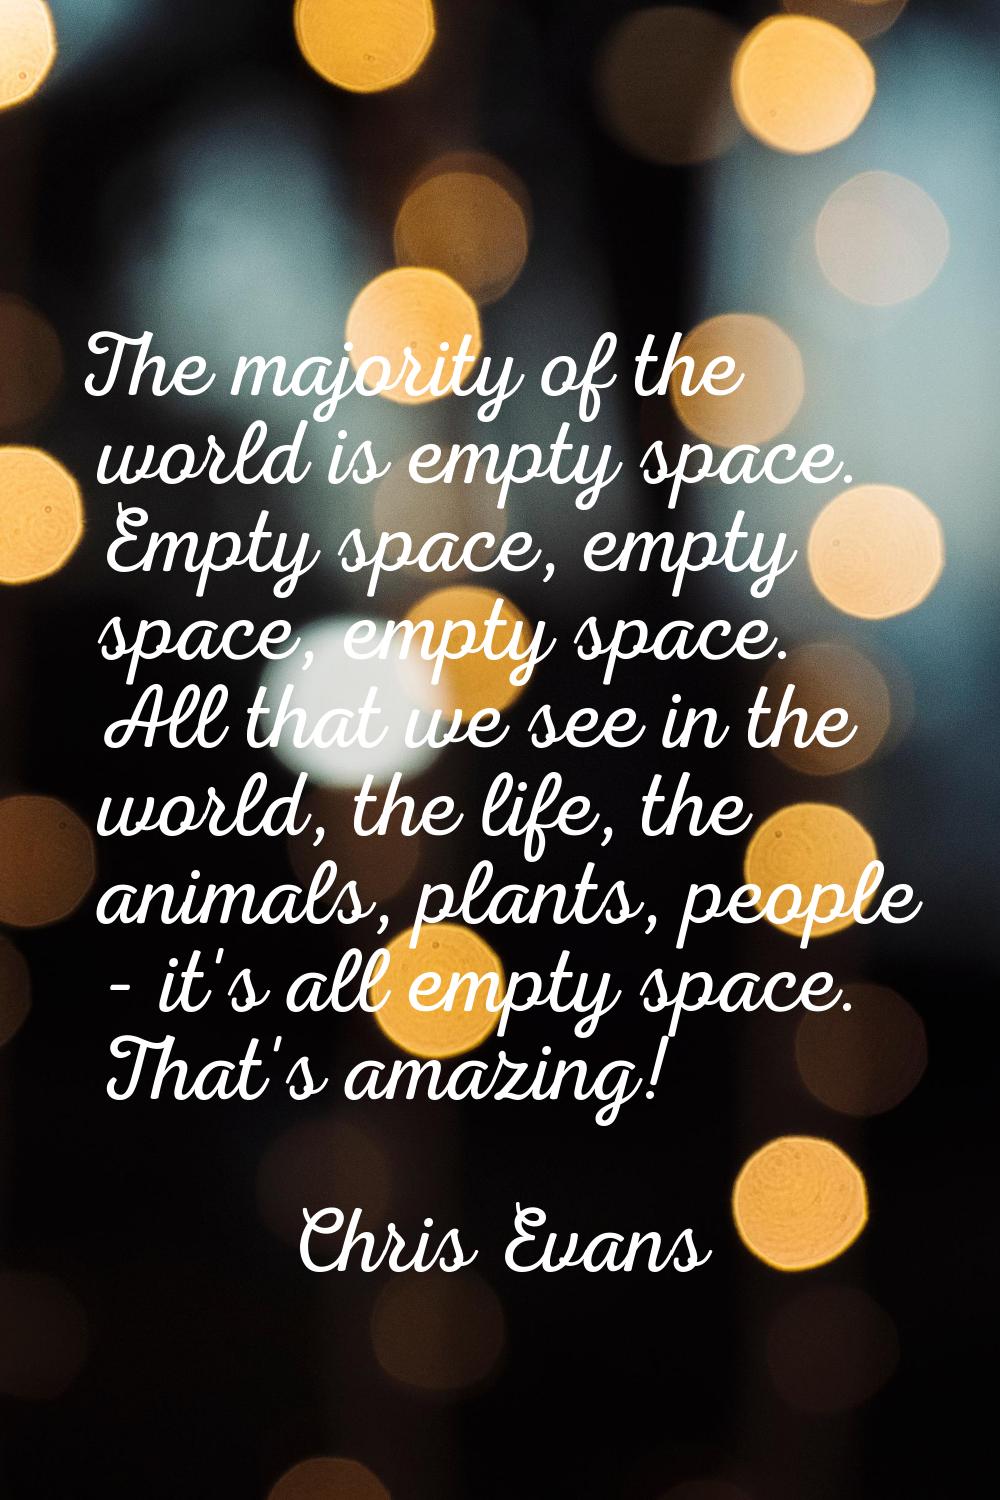 The majority of the world is empty space. Empty space, empty space, empty space. All that we see in